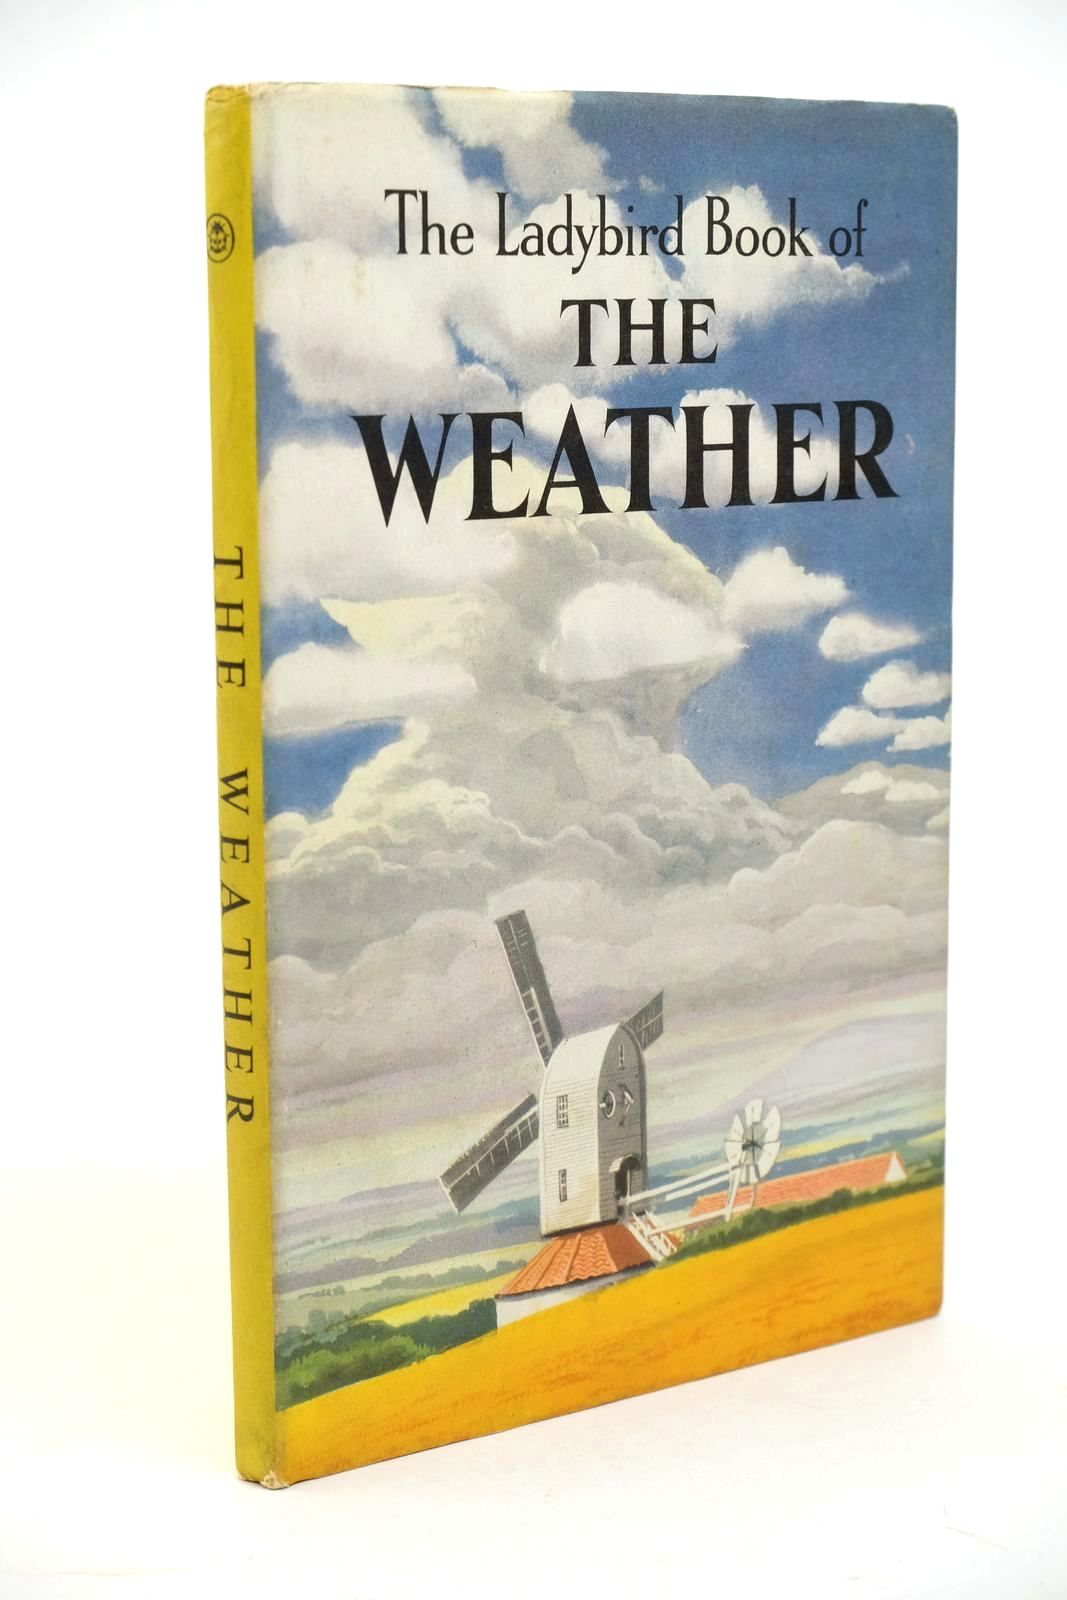 Photo of THE LADYBIRD BOOK OF THE WEATHER written by Newing, F.E. Bowood, Richard illustrated by Ayton, Robert published by Wills &amp; Hepworth Ltd. (STOCK CODE: 1323149)  for sale by Stella & Rose's Books